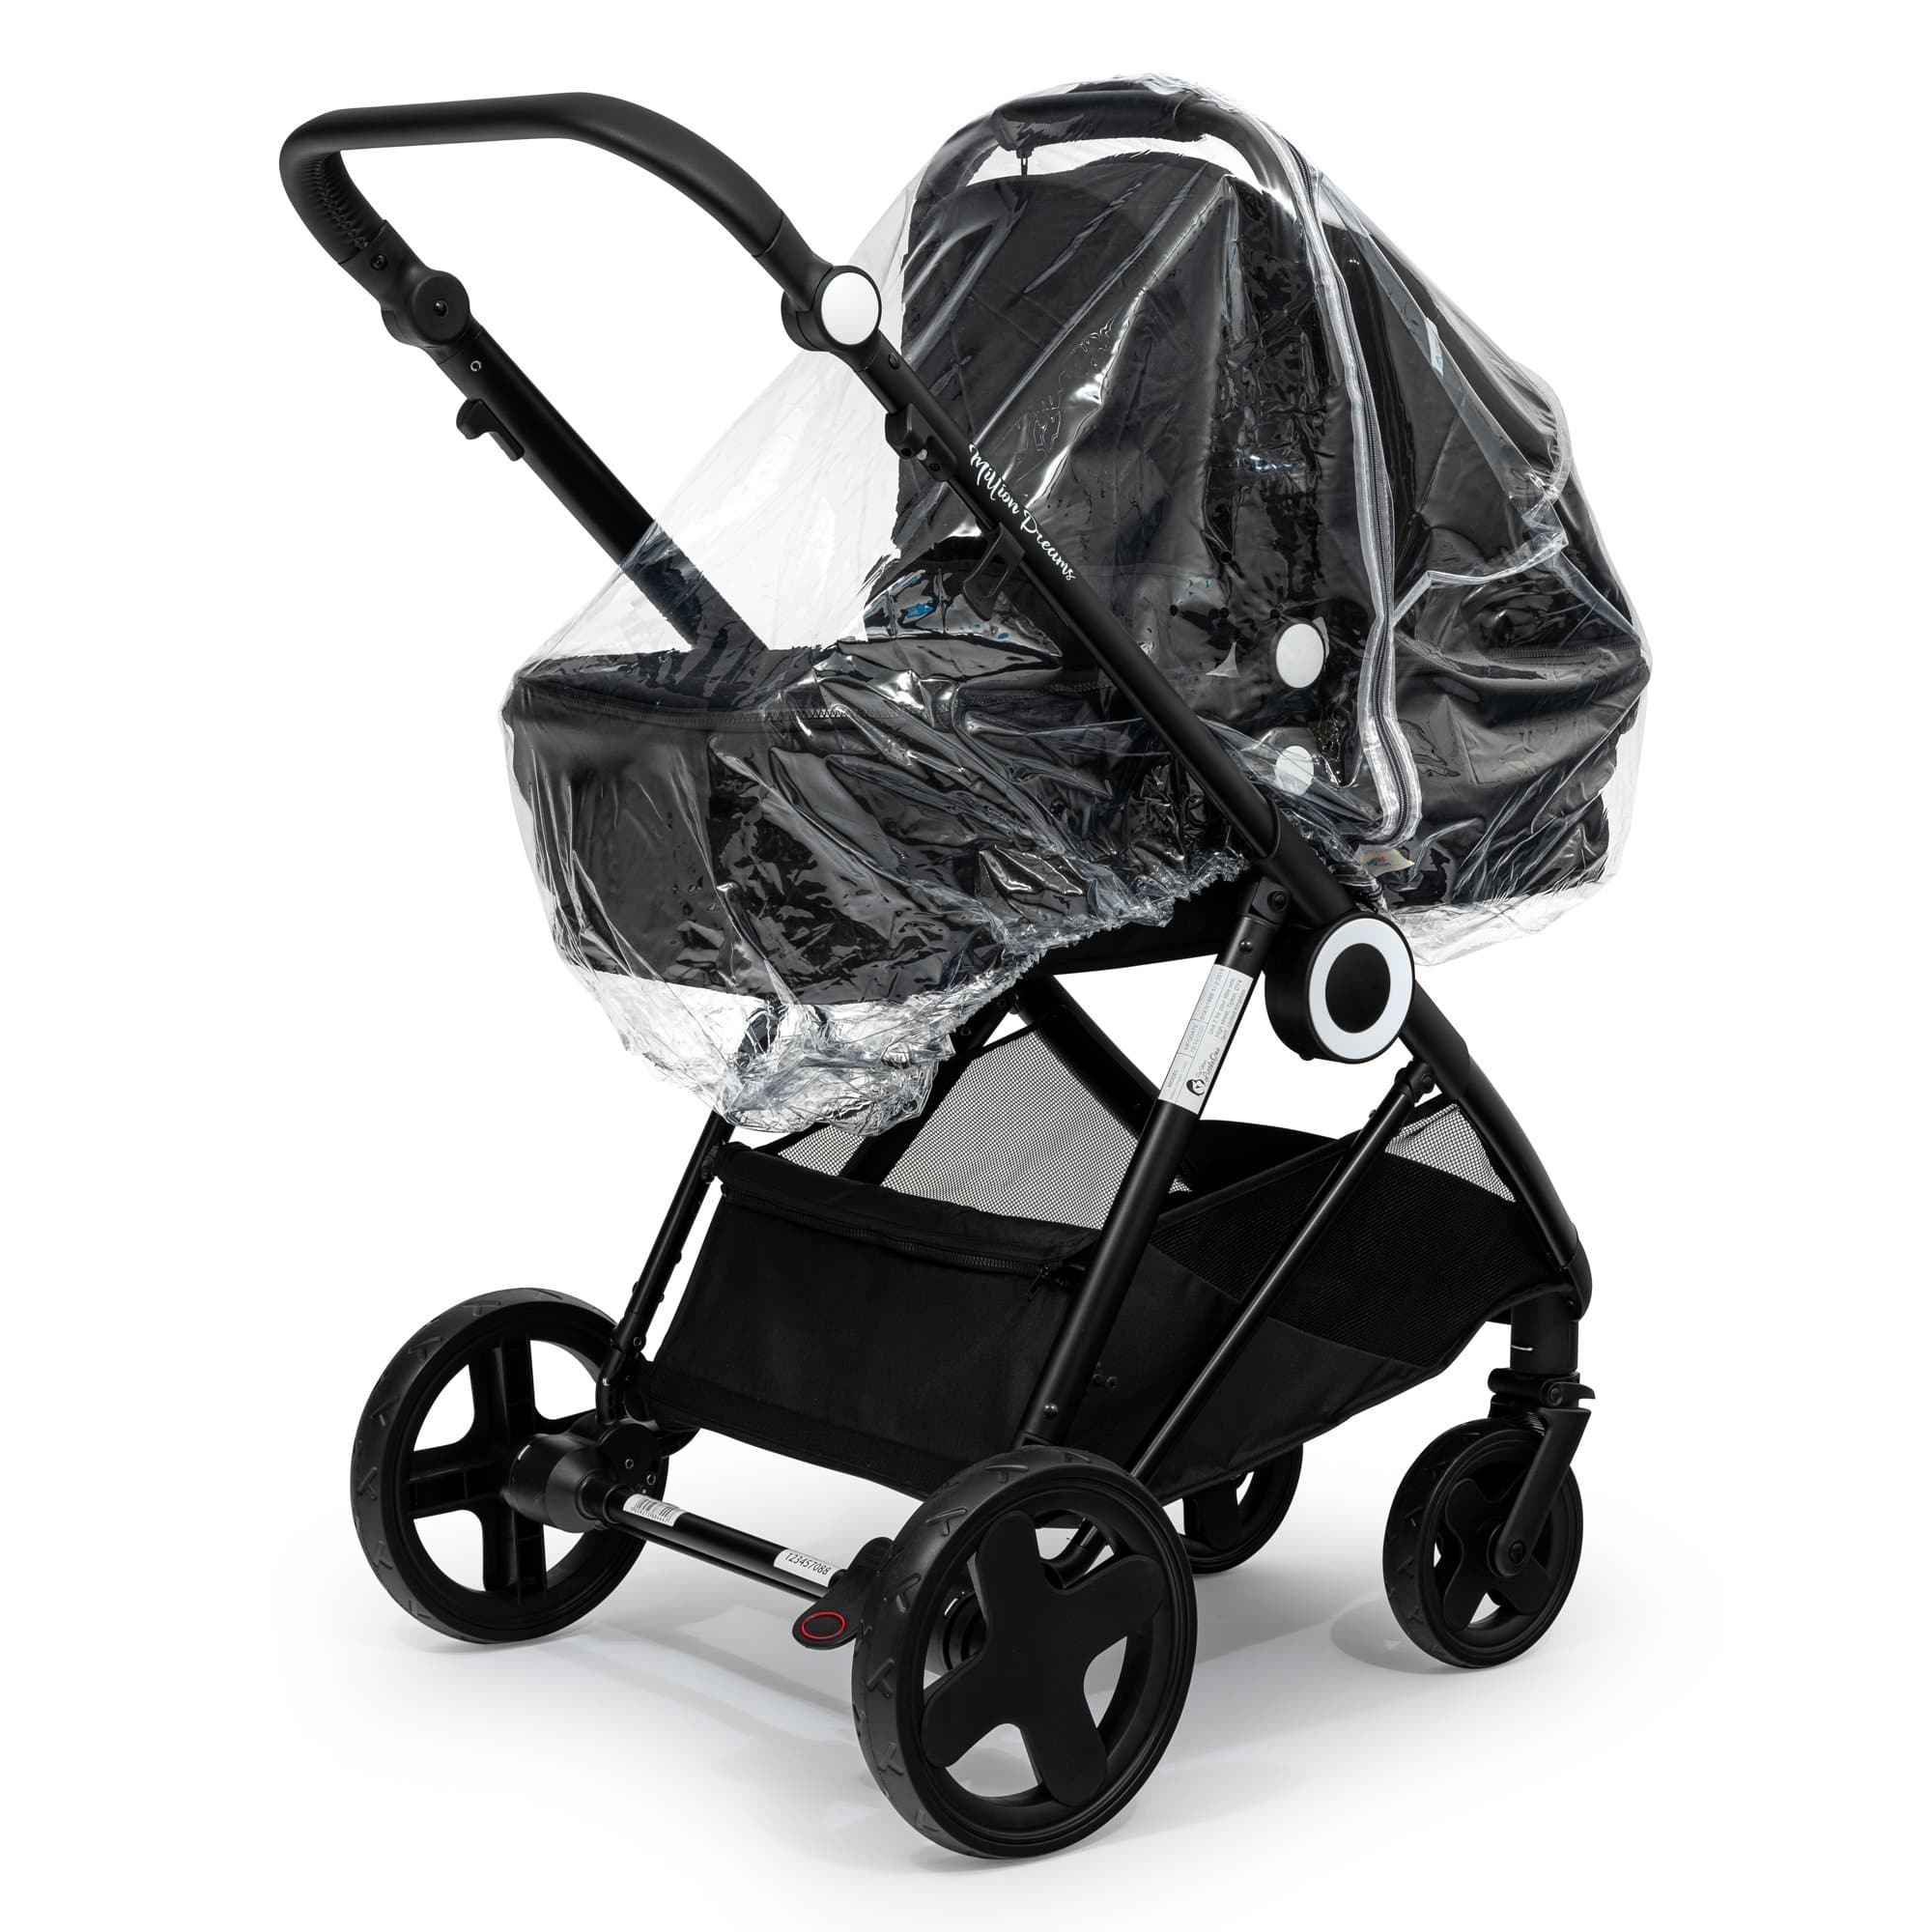 2 in 1 Rain Cover Compatible with Hauck - Fits All Models - For Your Little One